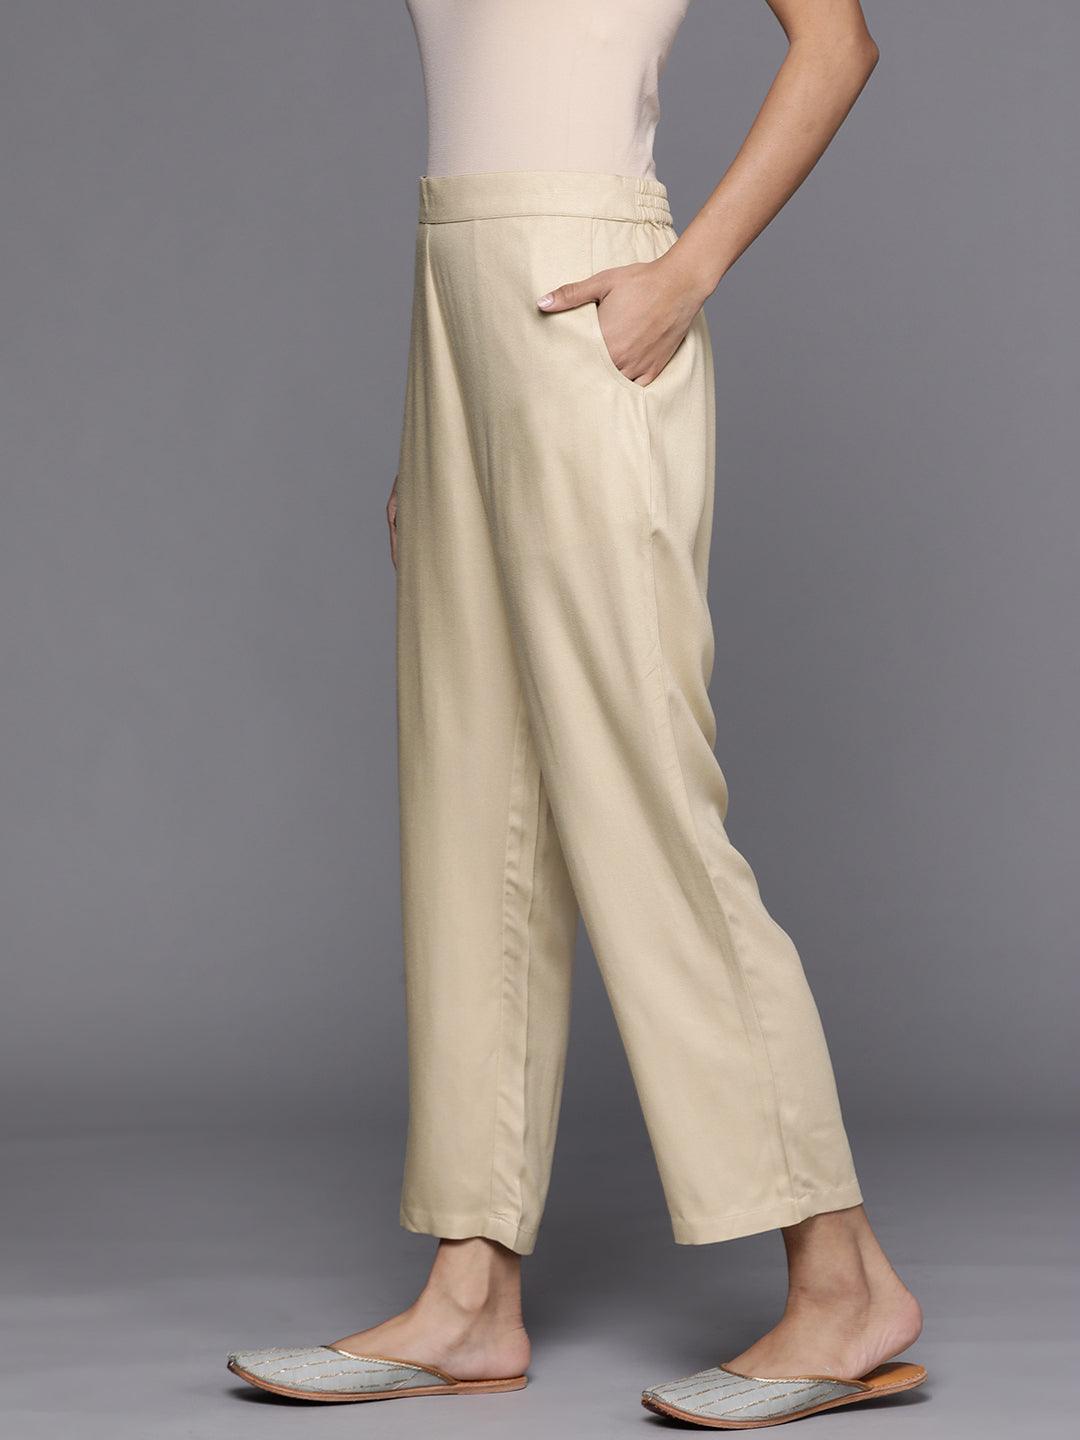 Beige Solid Pashmina Wool Trousers